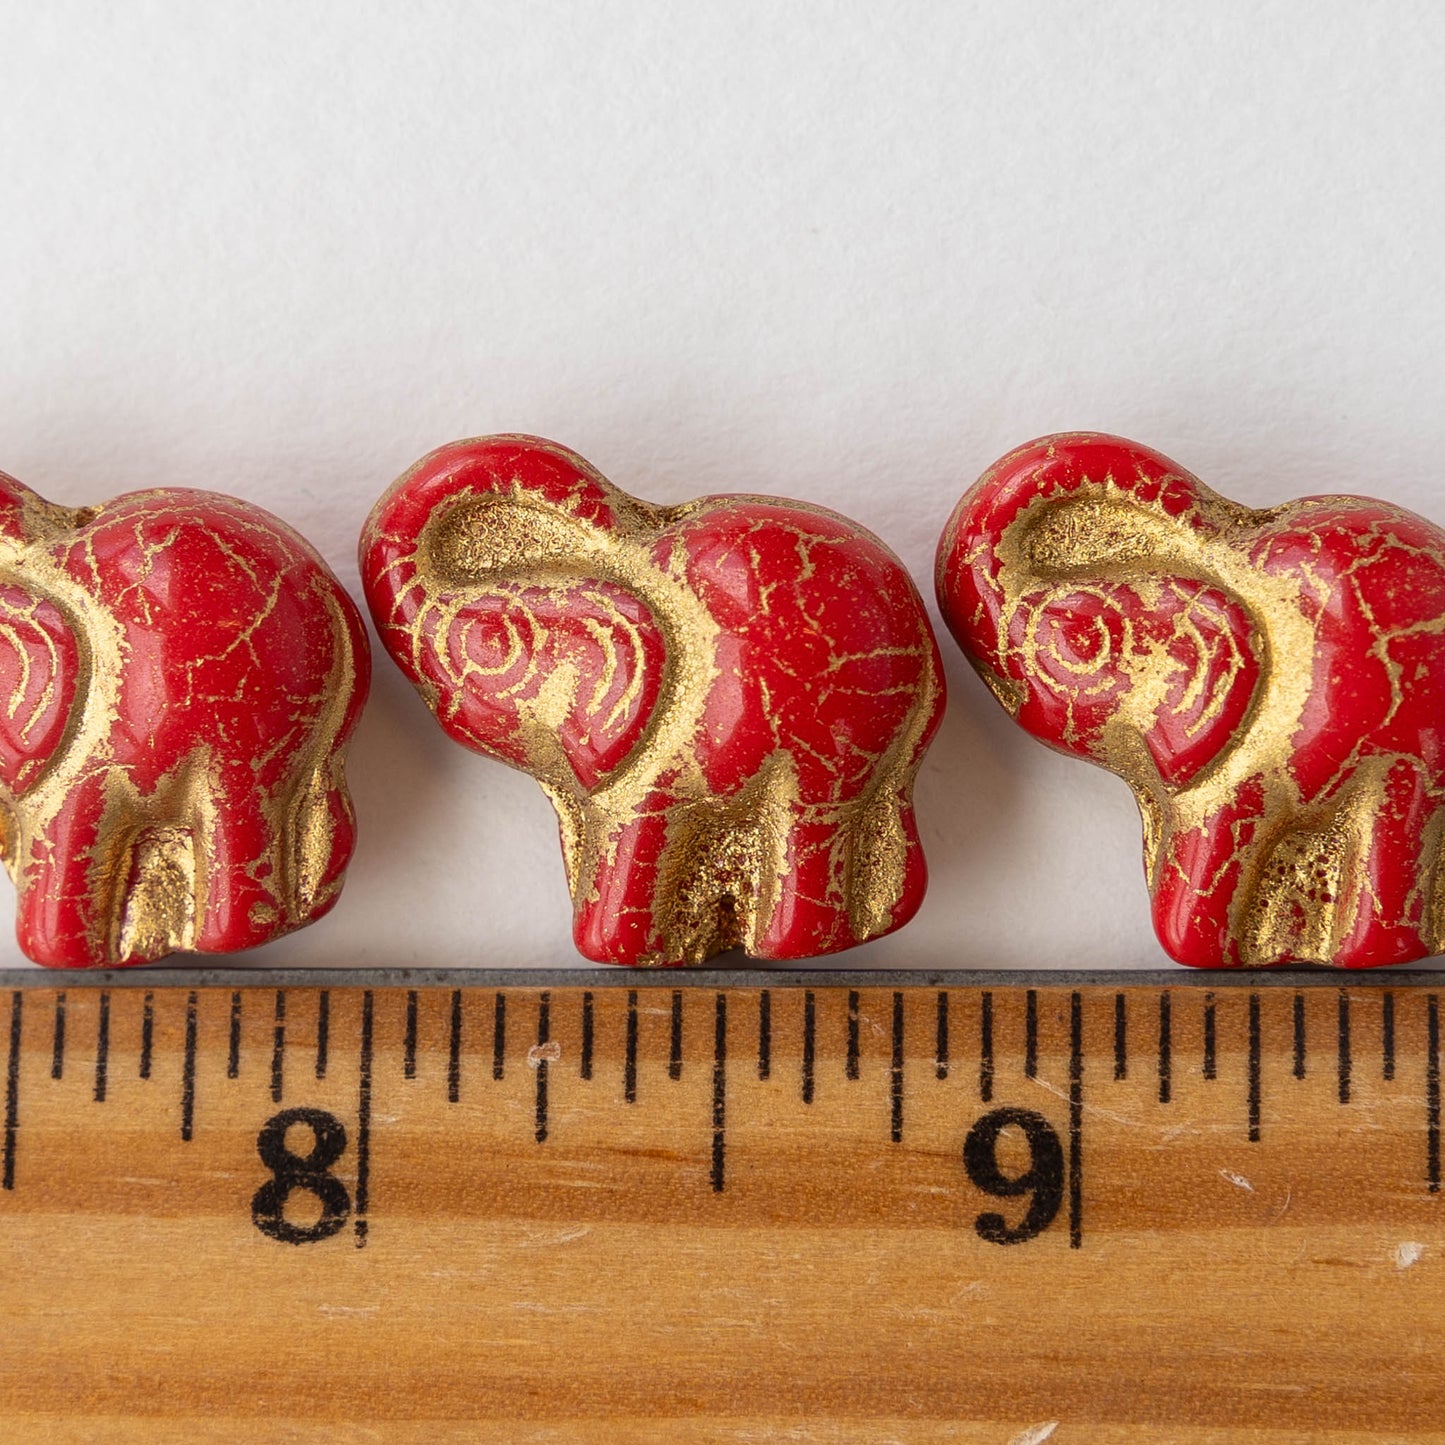 20x21mm Glass Elephant Beads - Red with Gold Decor - 5, 10 or 20